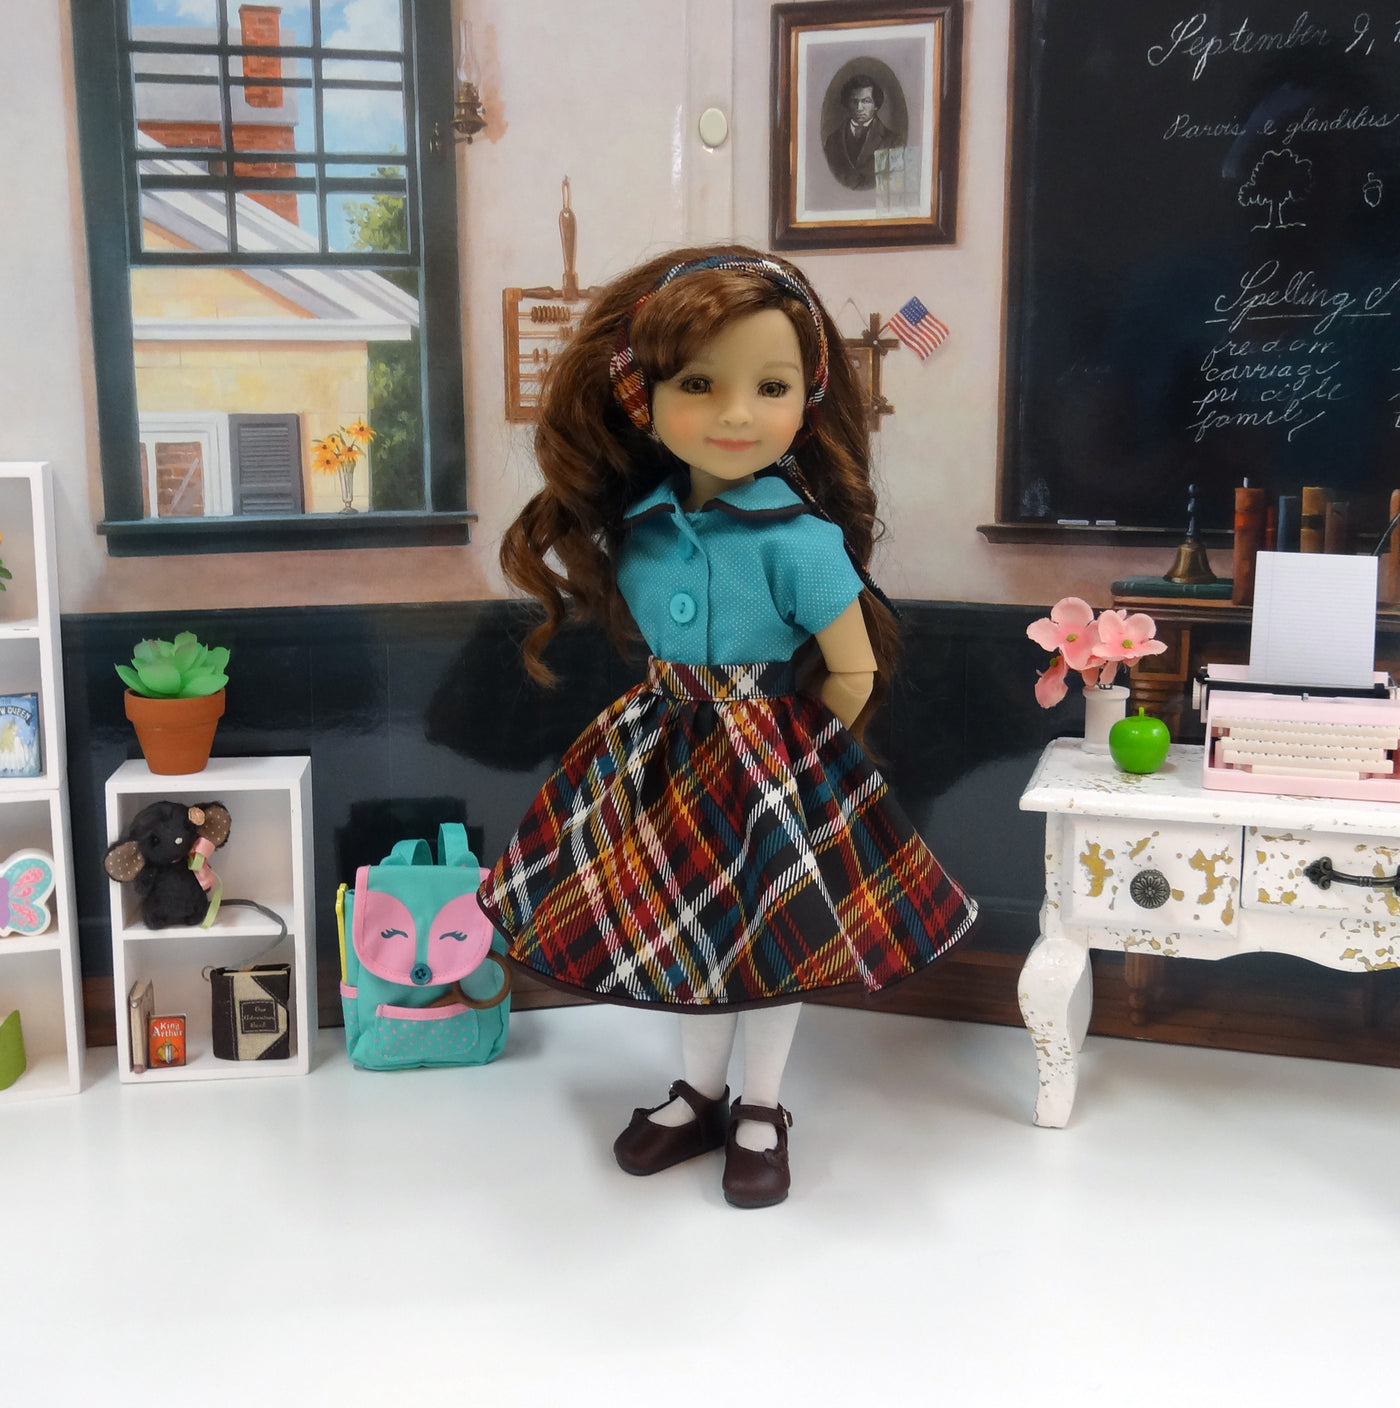 Schoolgirl Plaid - blouse & skirt for Ruby Red Fashion Friends doll